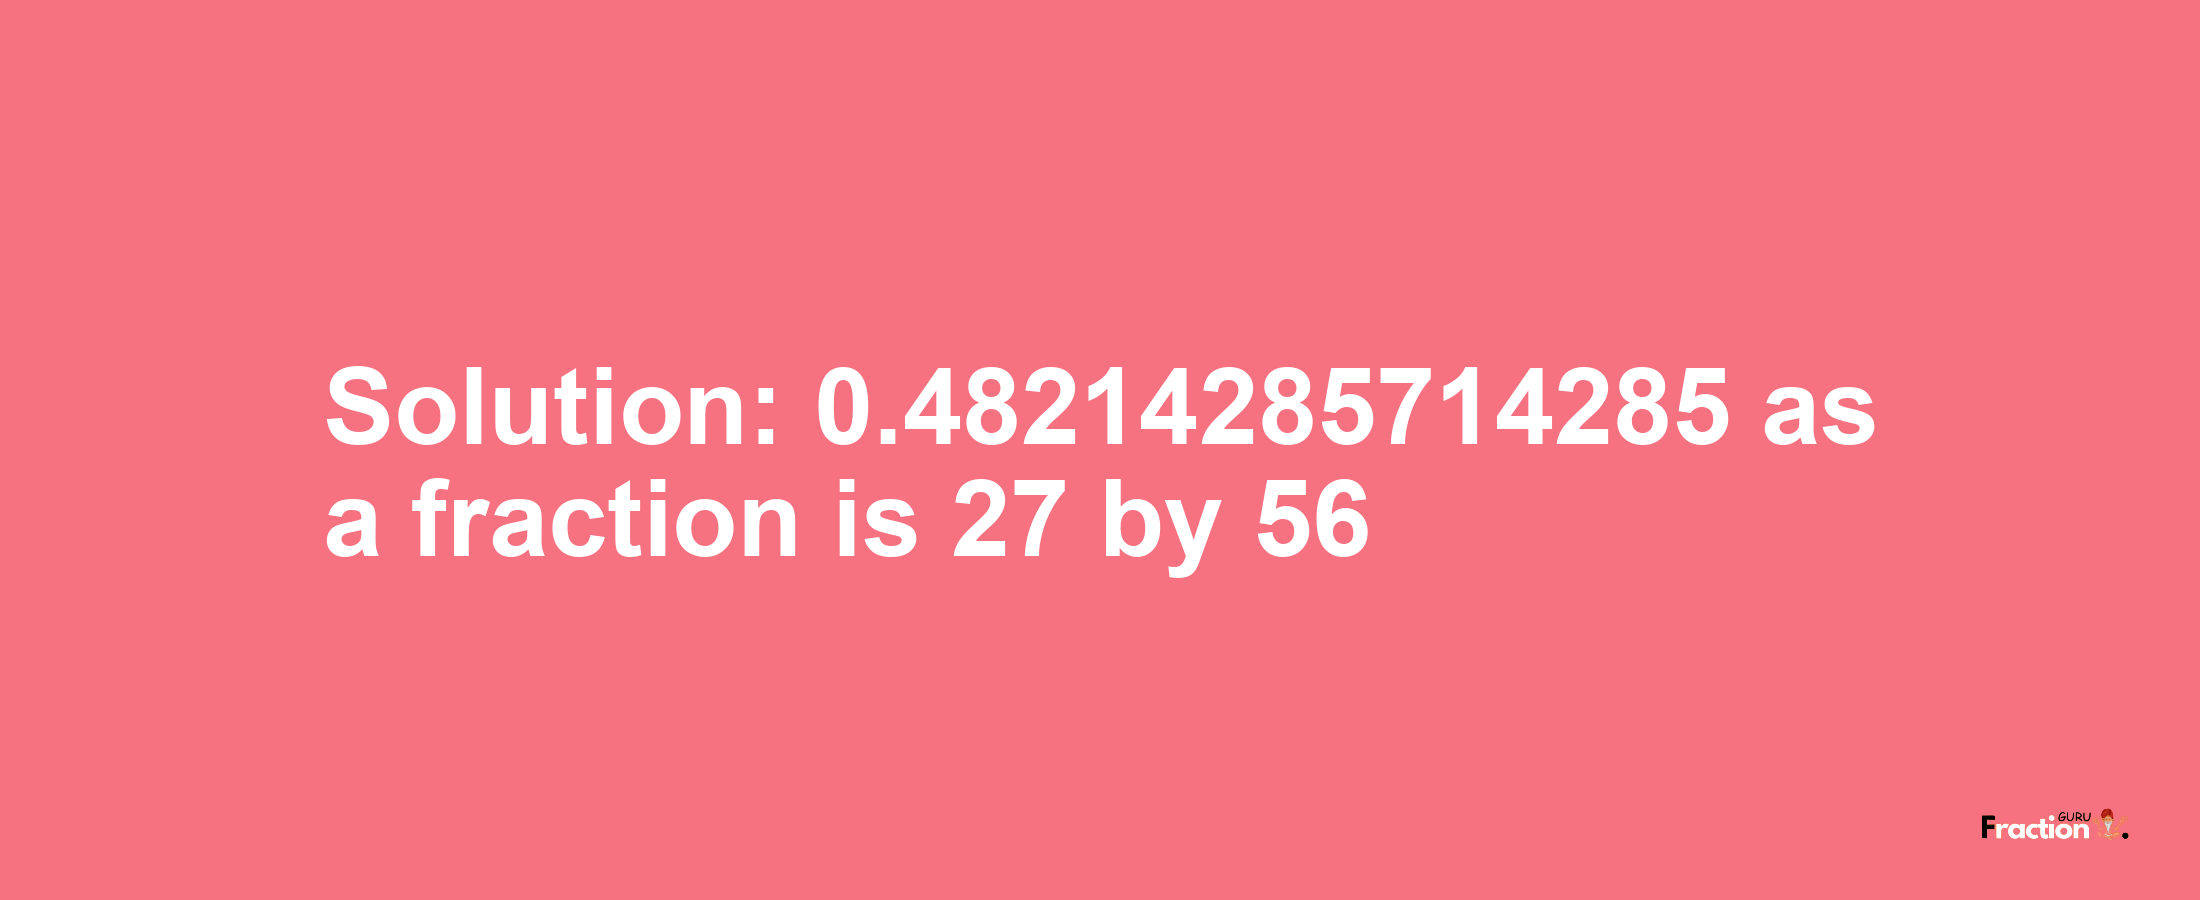 Solution:0.48214285714285 as a fraction is 27/56